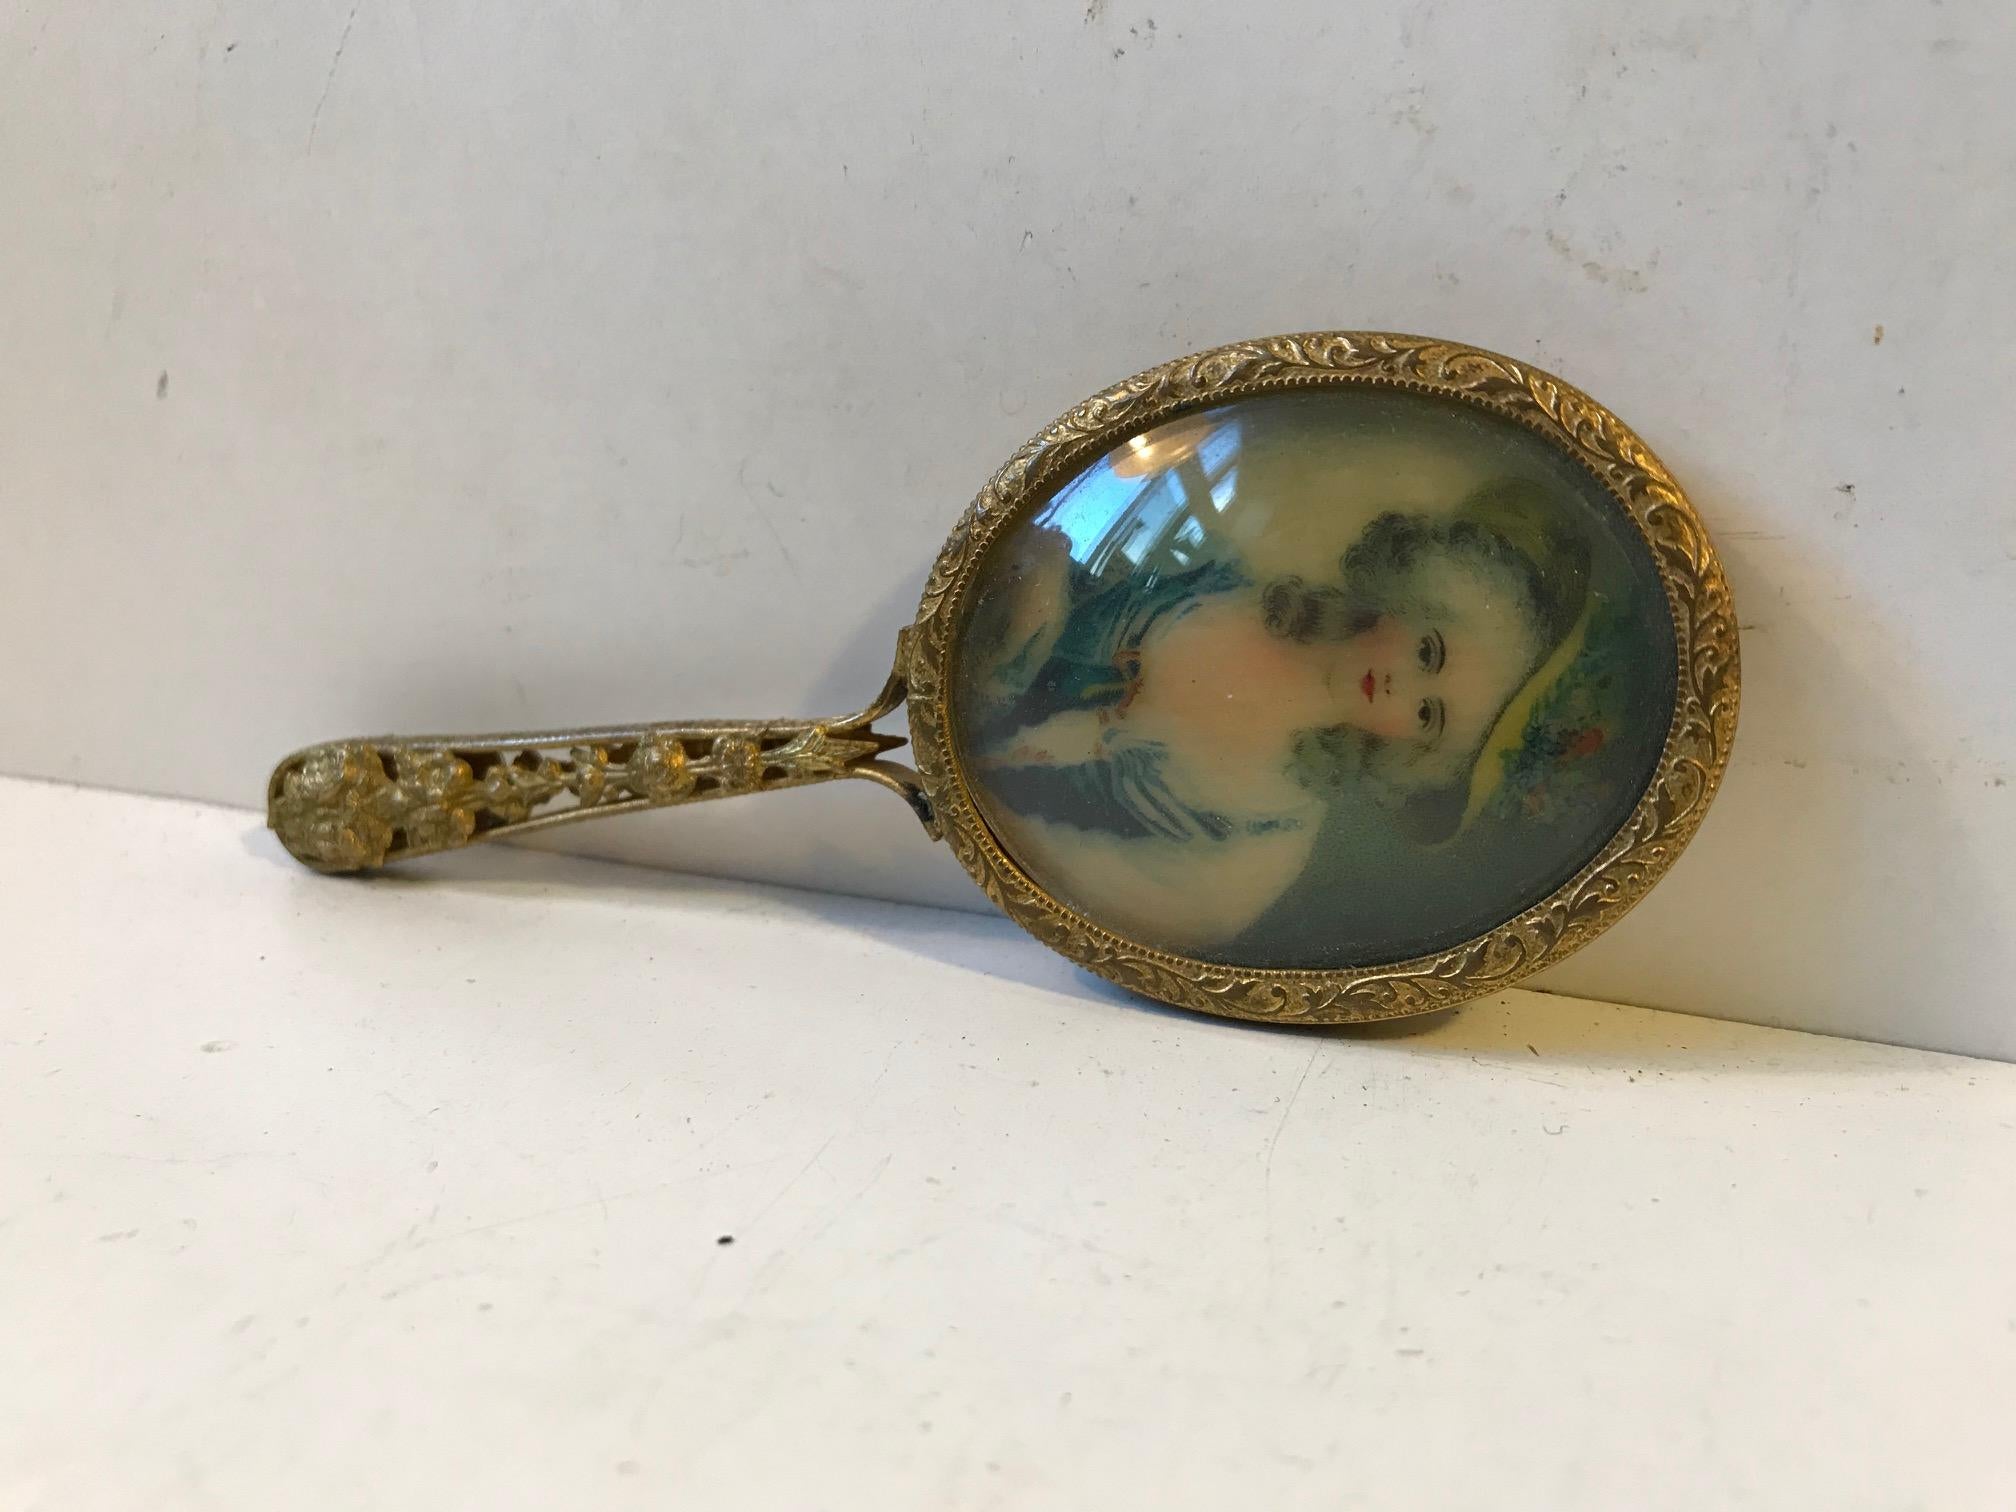 Small French miniature hand mirror in gilded brass/bronze. A beveled mirror to one side and a miniature female portrait behind convex glass to the other.